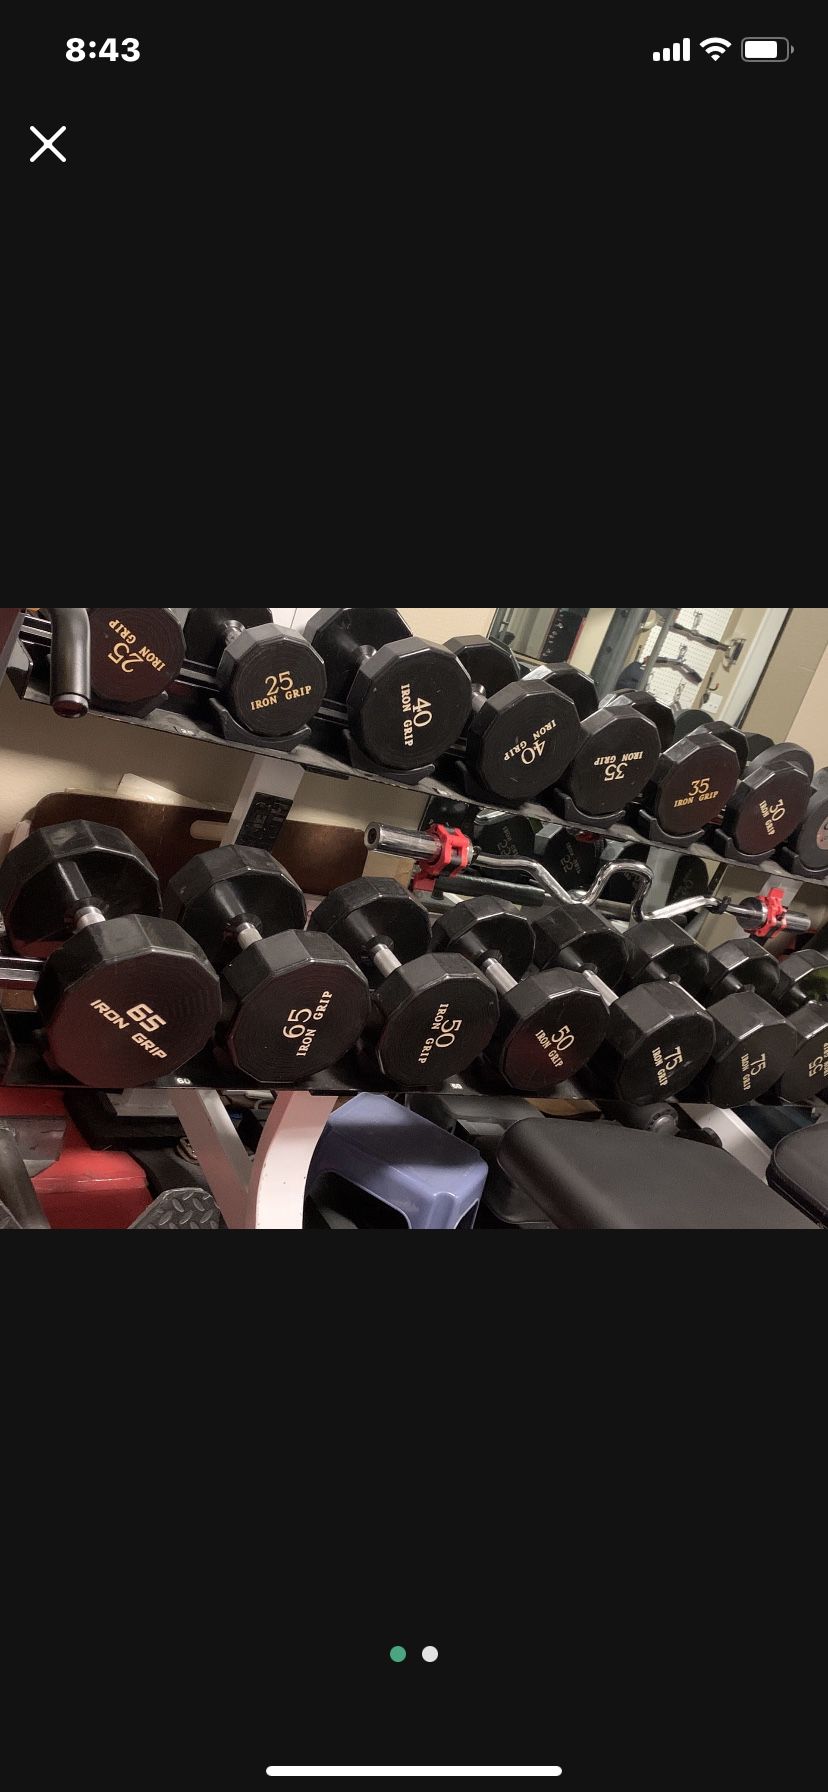  URETHANE IRON GRIP COMMERCIAL DUMBBELLS  1060 POUNDS IN TOTAL IN GREAT CONDITIONS 